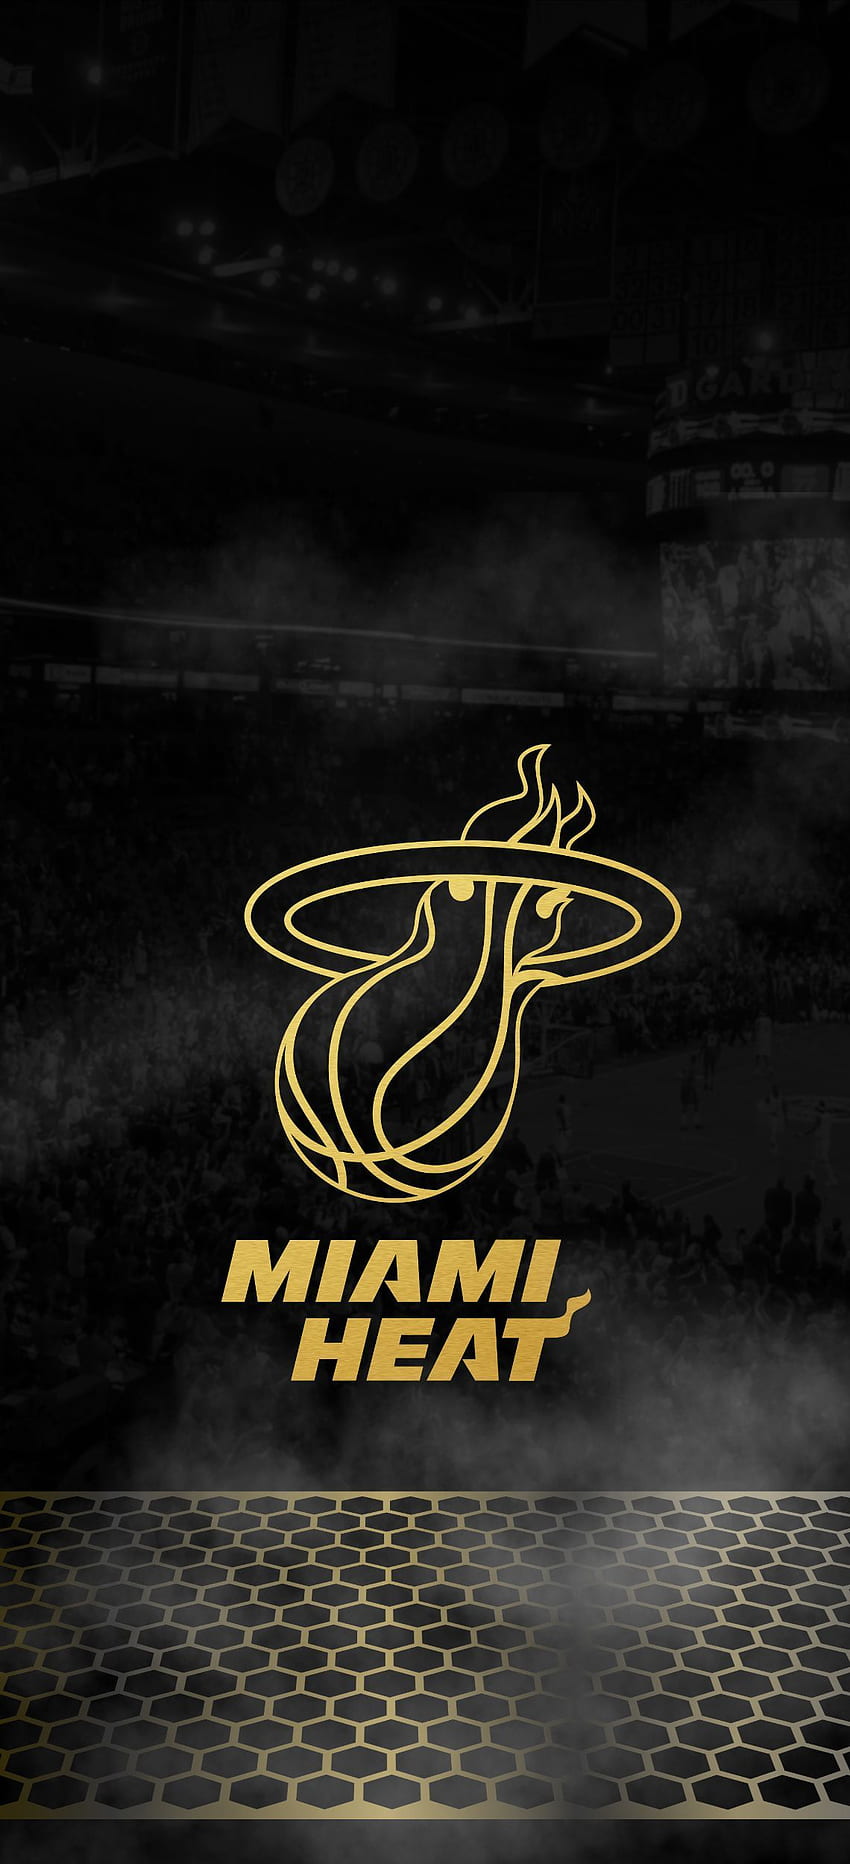 Miami HEAT on Twitter 5 VICE uniforms  5 VICE wallpapers Were  running it back this WallpaperWednesday before the era comes to a close  VICErewind  httpstcoTNgAZA5TbW  Twitter